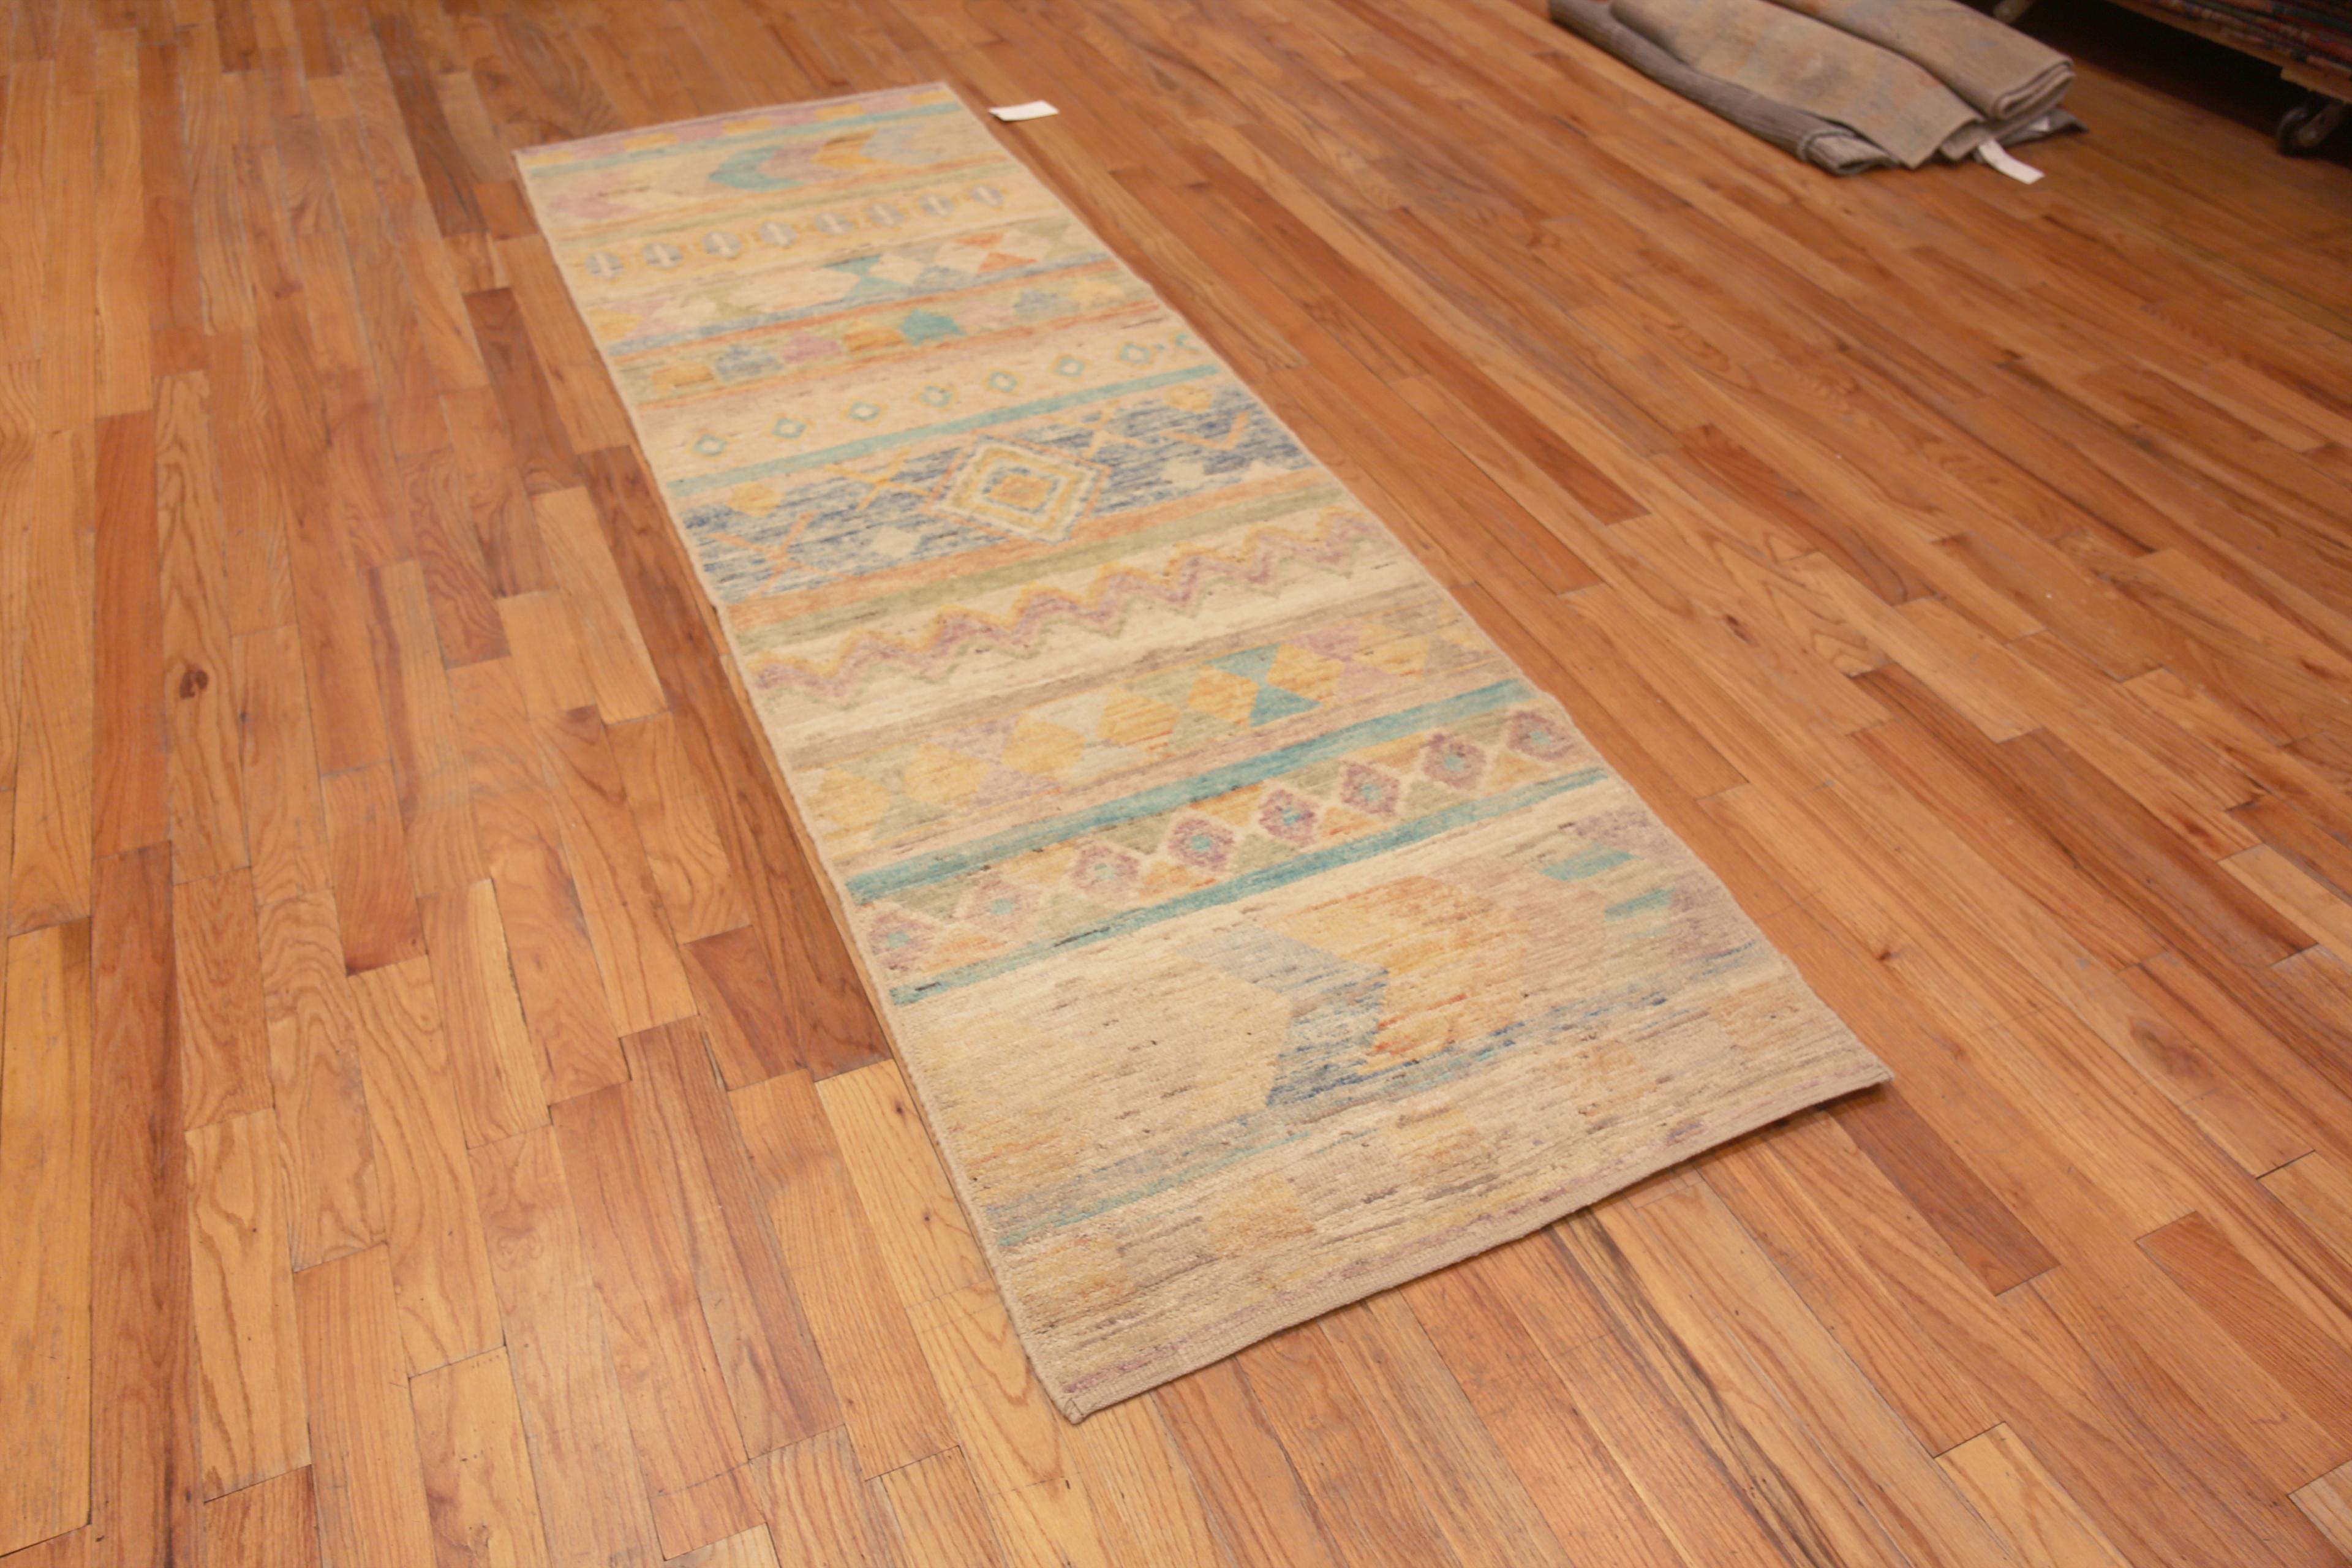 A Rustic Happy Colorful Tribal More Primitive Geometric Design Modern Hallway Runner Rug, Country of Origin: Central Asia, Circa Date: Modern Rug 